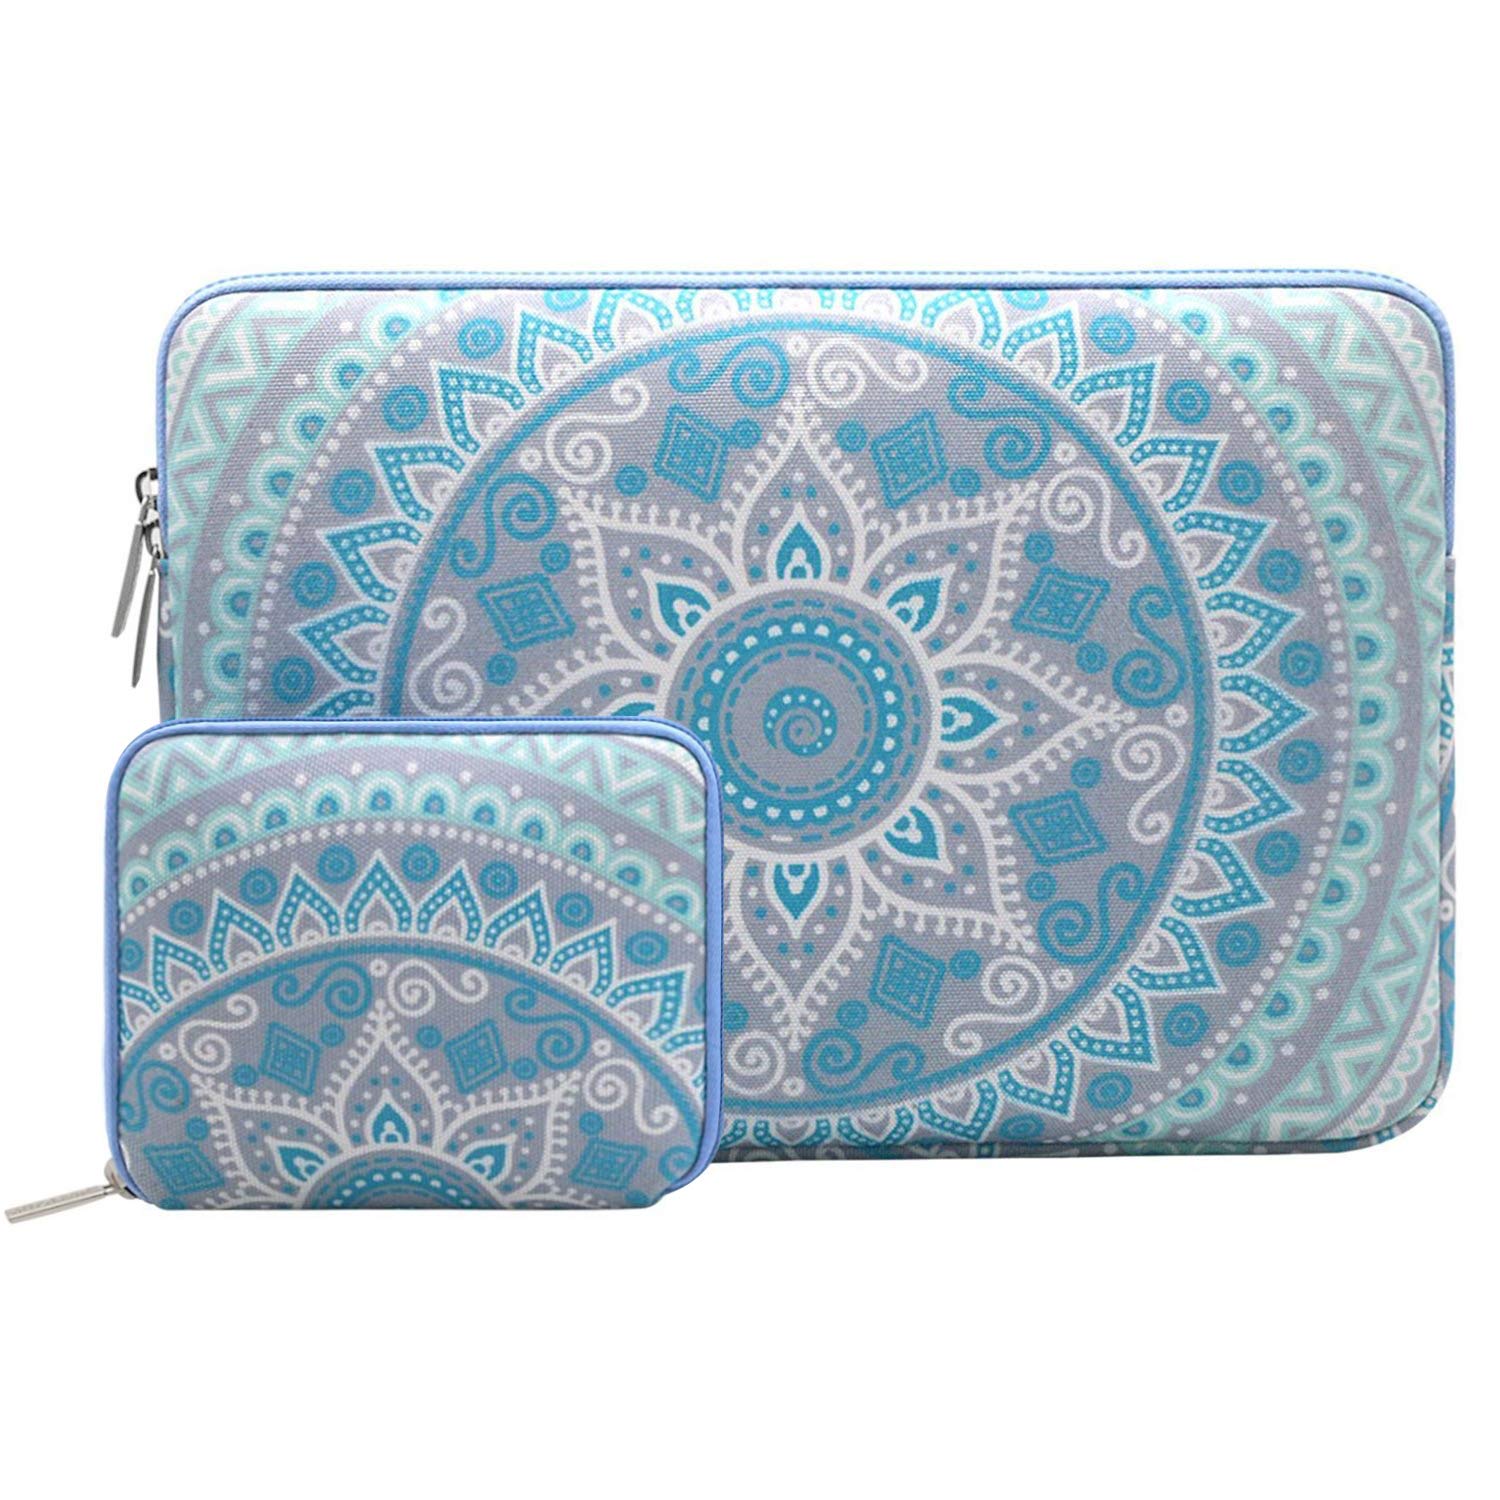 Mosiso Mosiso Laptop Sleeve Bag for 13-13.3 Inch MacBook Pro, MacBook Air, Notebook Computer with Small Case, Canvas Fabric Mandala Pattern Protective Cover, Mint Green and Blue